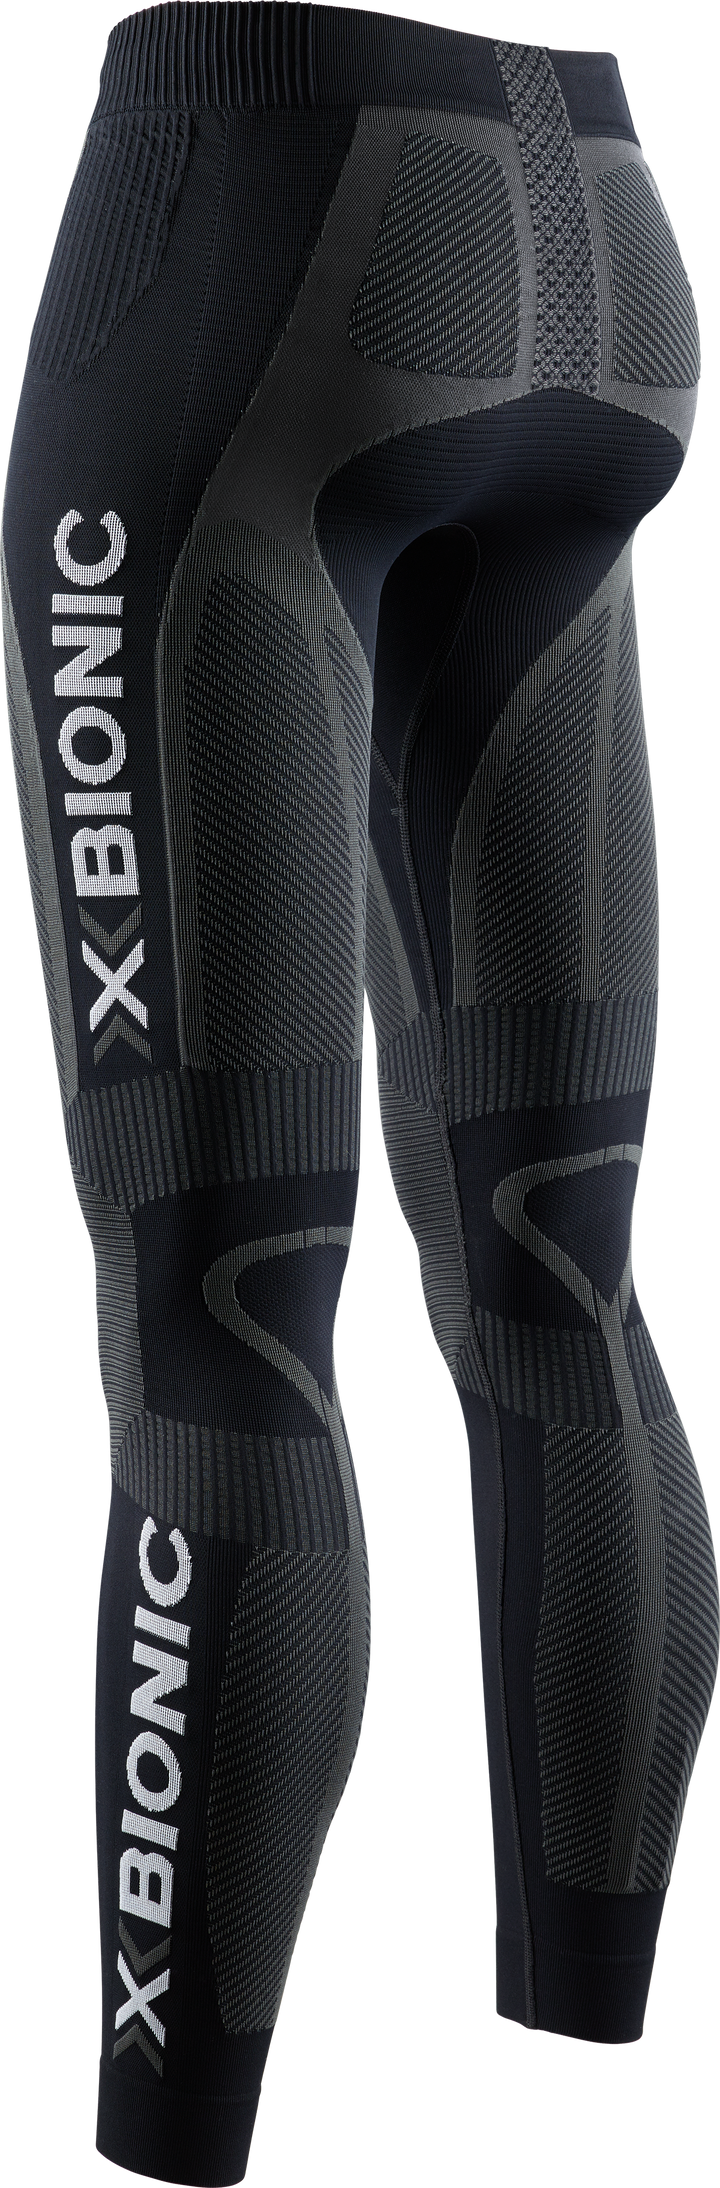 X-BIONIC Invent 4.0 women's pants - Black/Charcoal - THERMOACTIVE